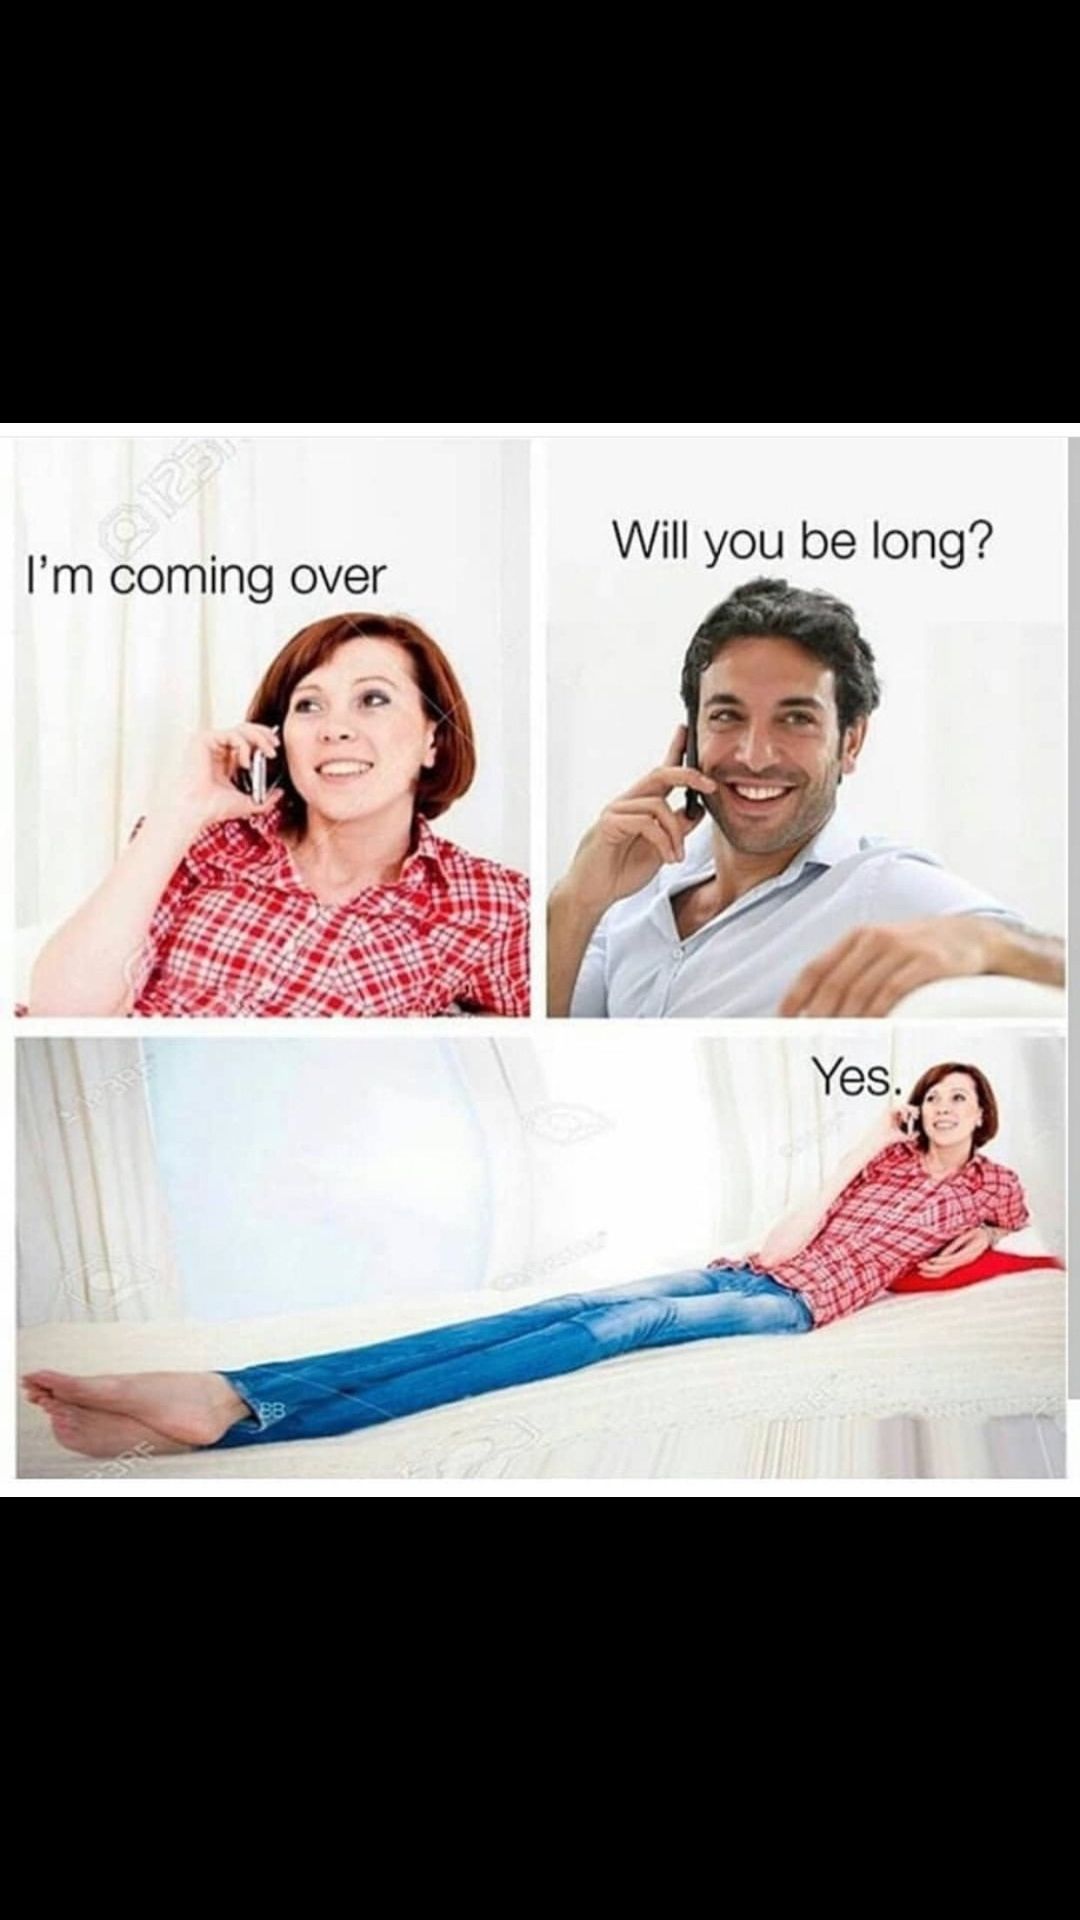 Will you be long?